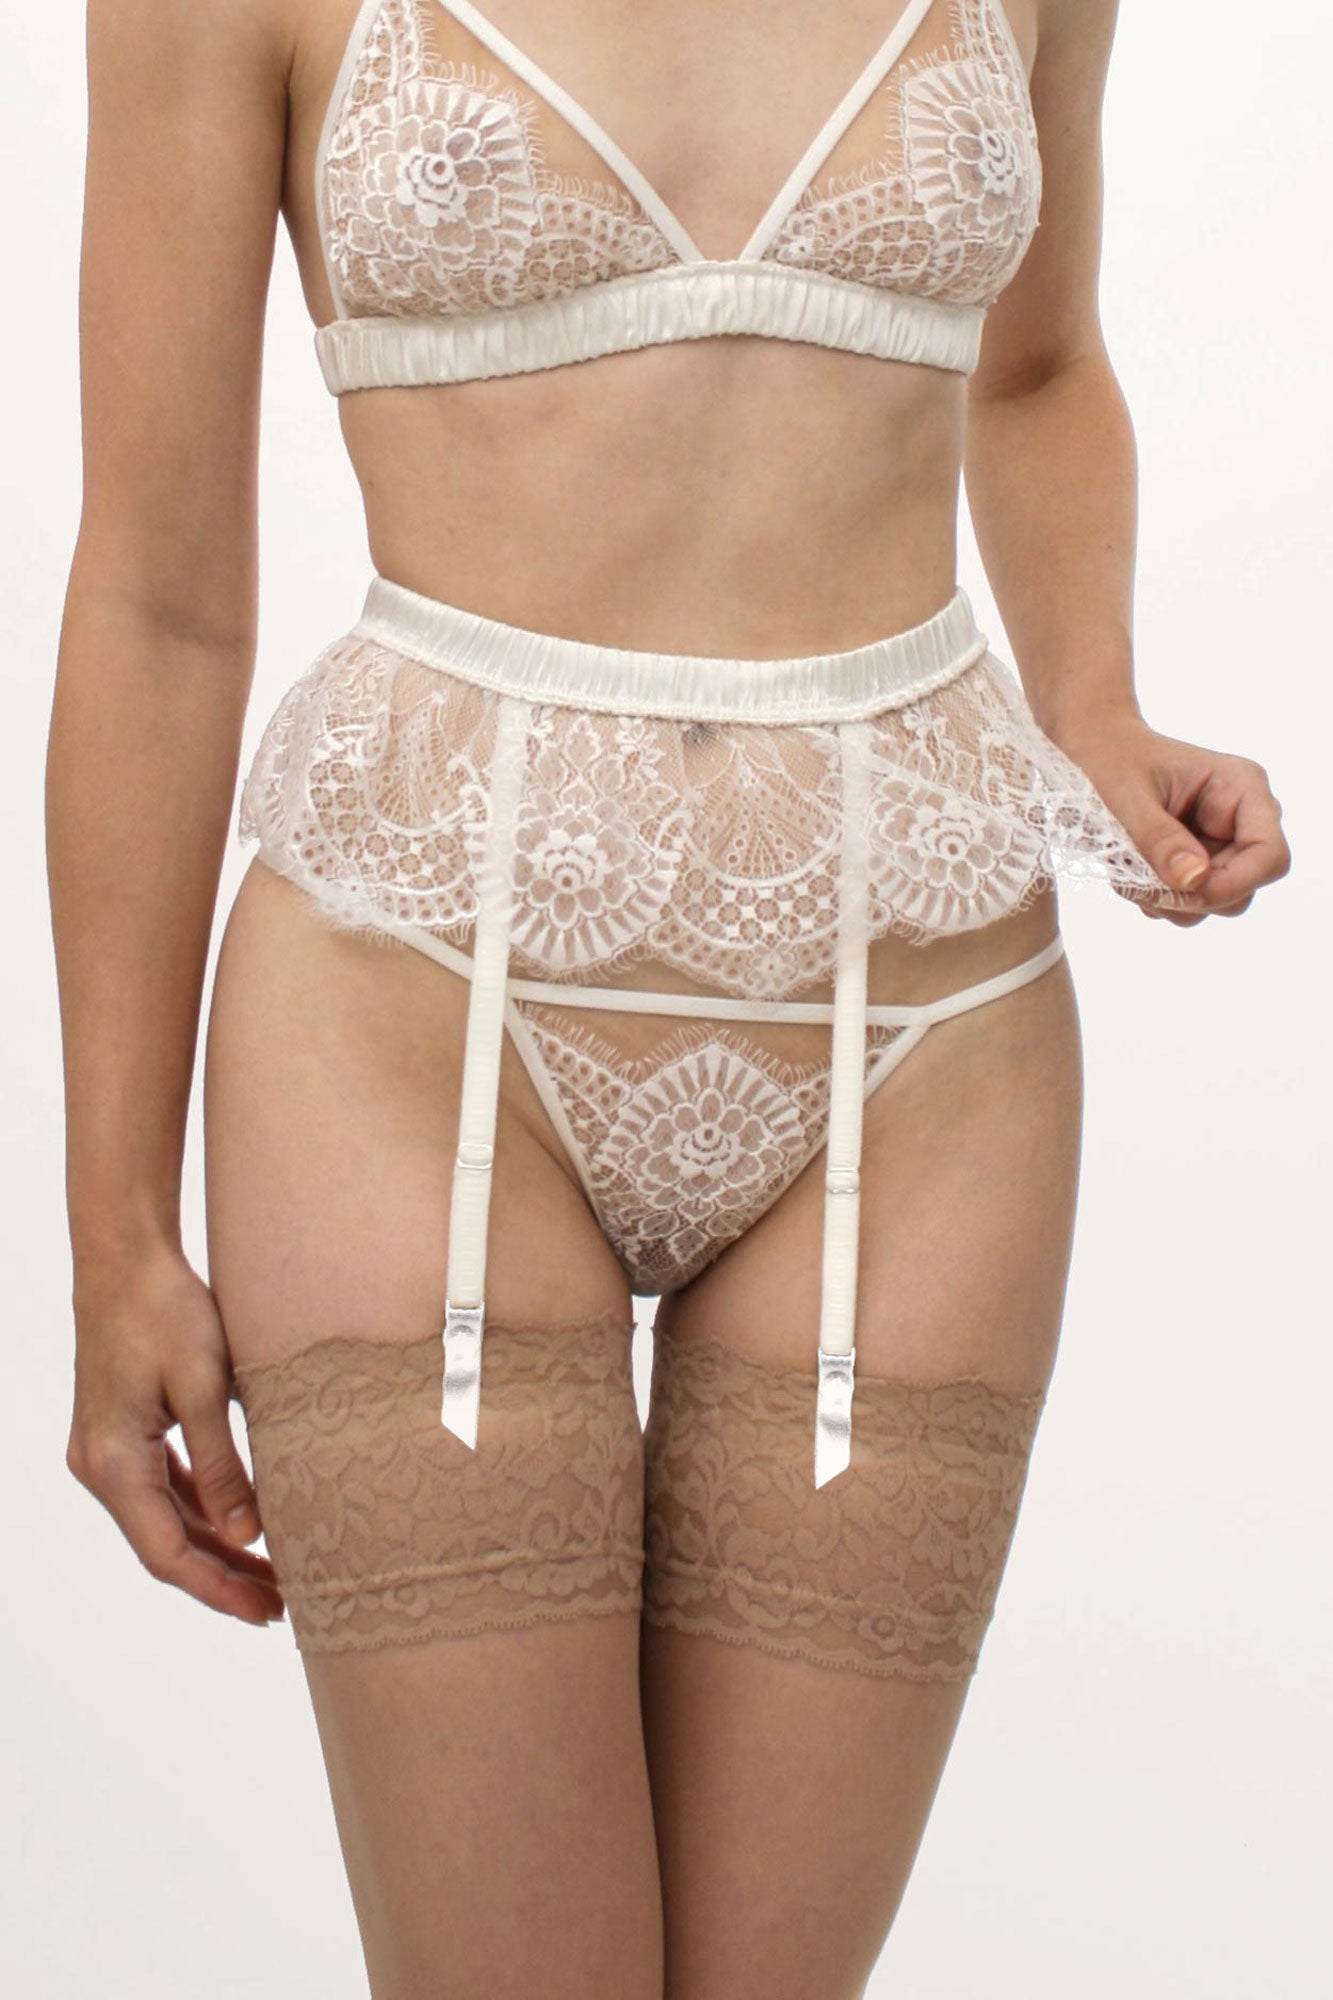 White lace suspender belt and garters for a bride on her wedding night